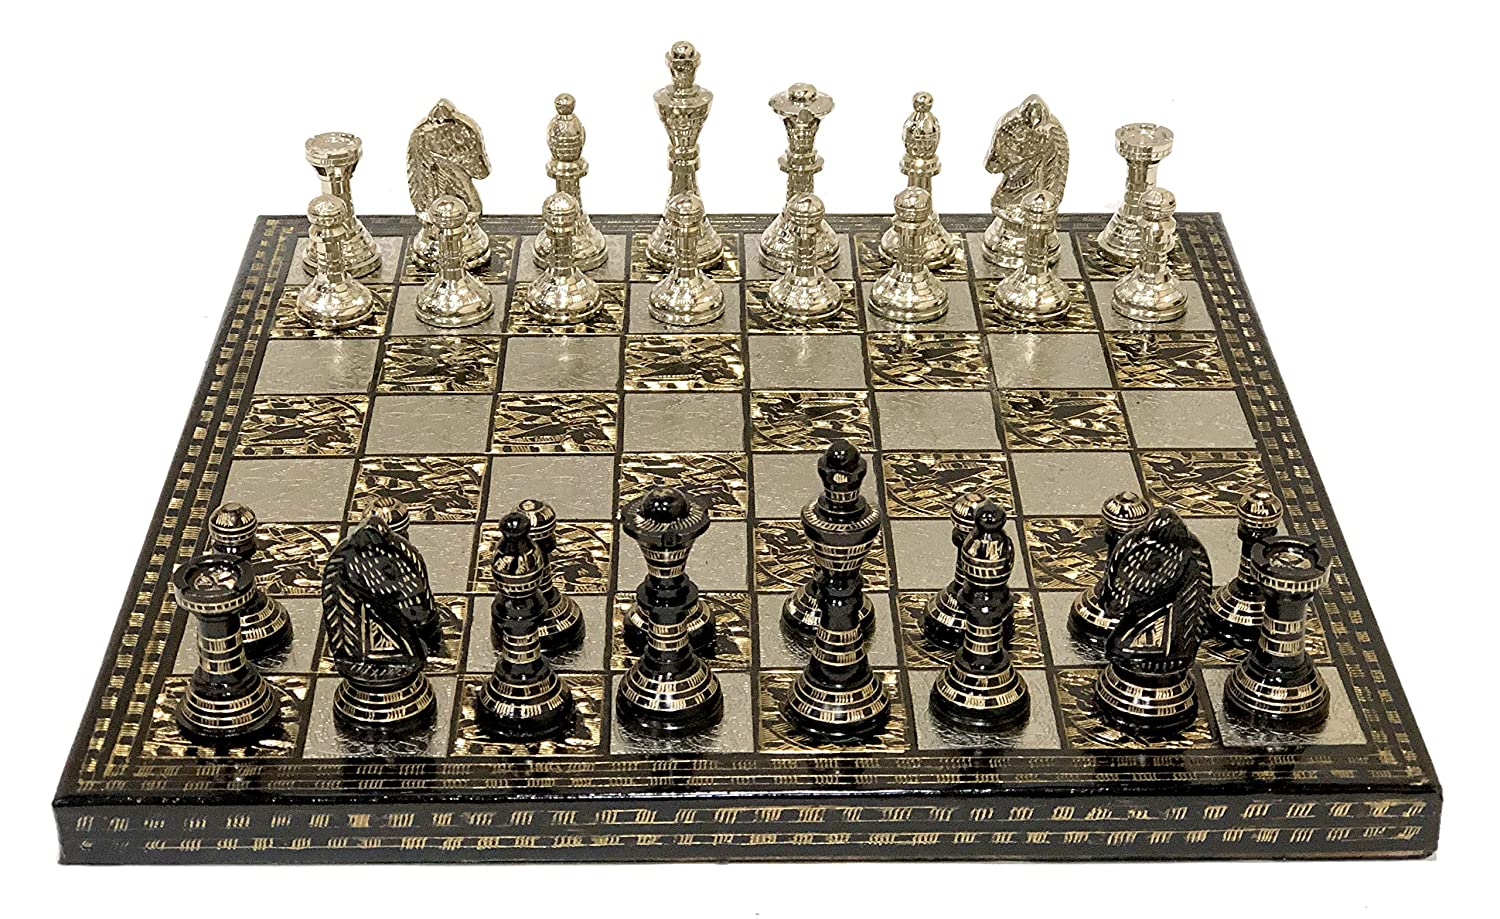 Stonkraft Collectible Green Marble Chess Board Set + Brass Crafted Pieces Pawns - Decorative Stone Chess - Home Décor - 20 Inches